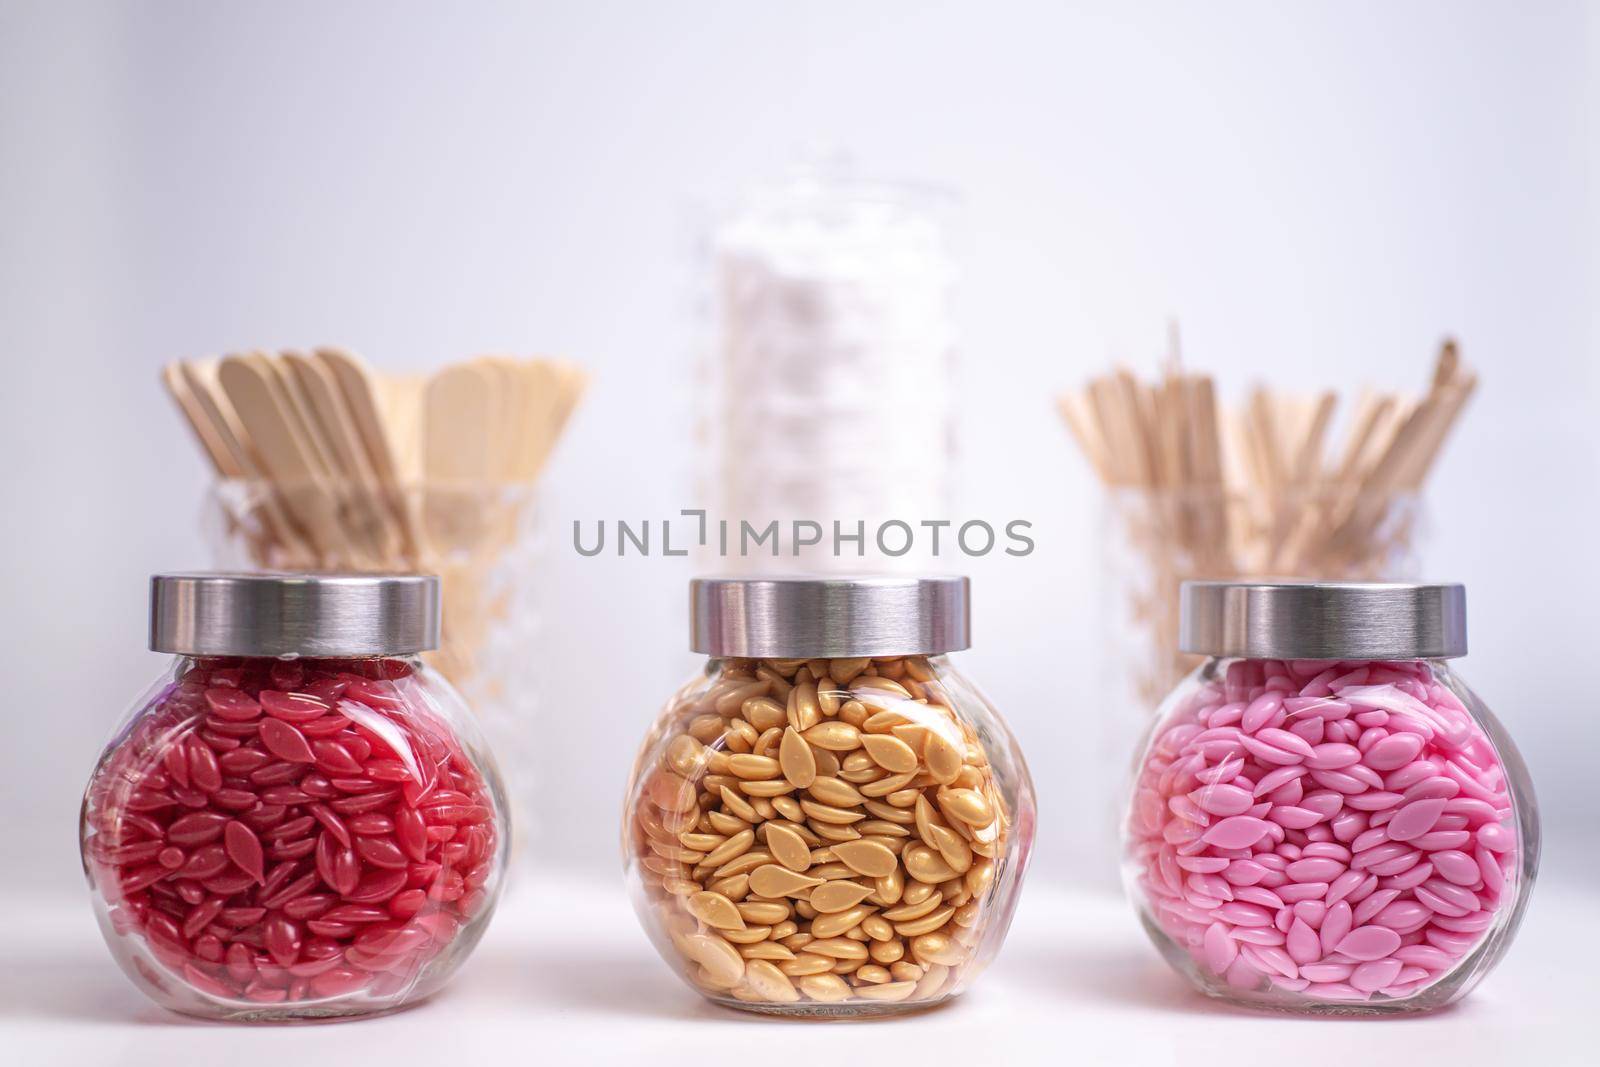 Glass jars filled with wax granules for depilation with wooden blades on a blurred background. selected focus